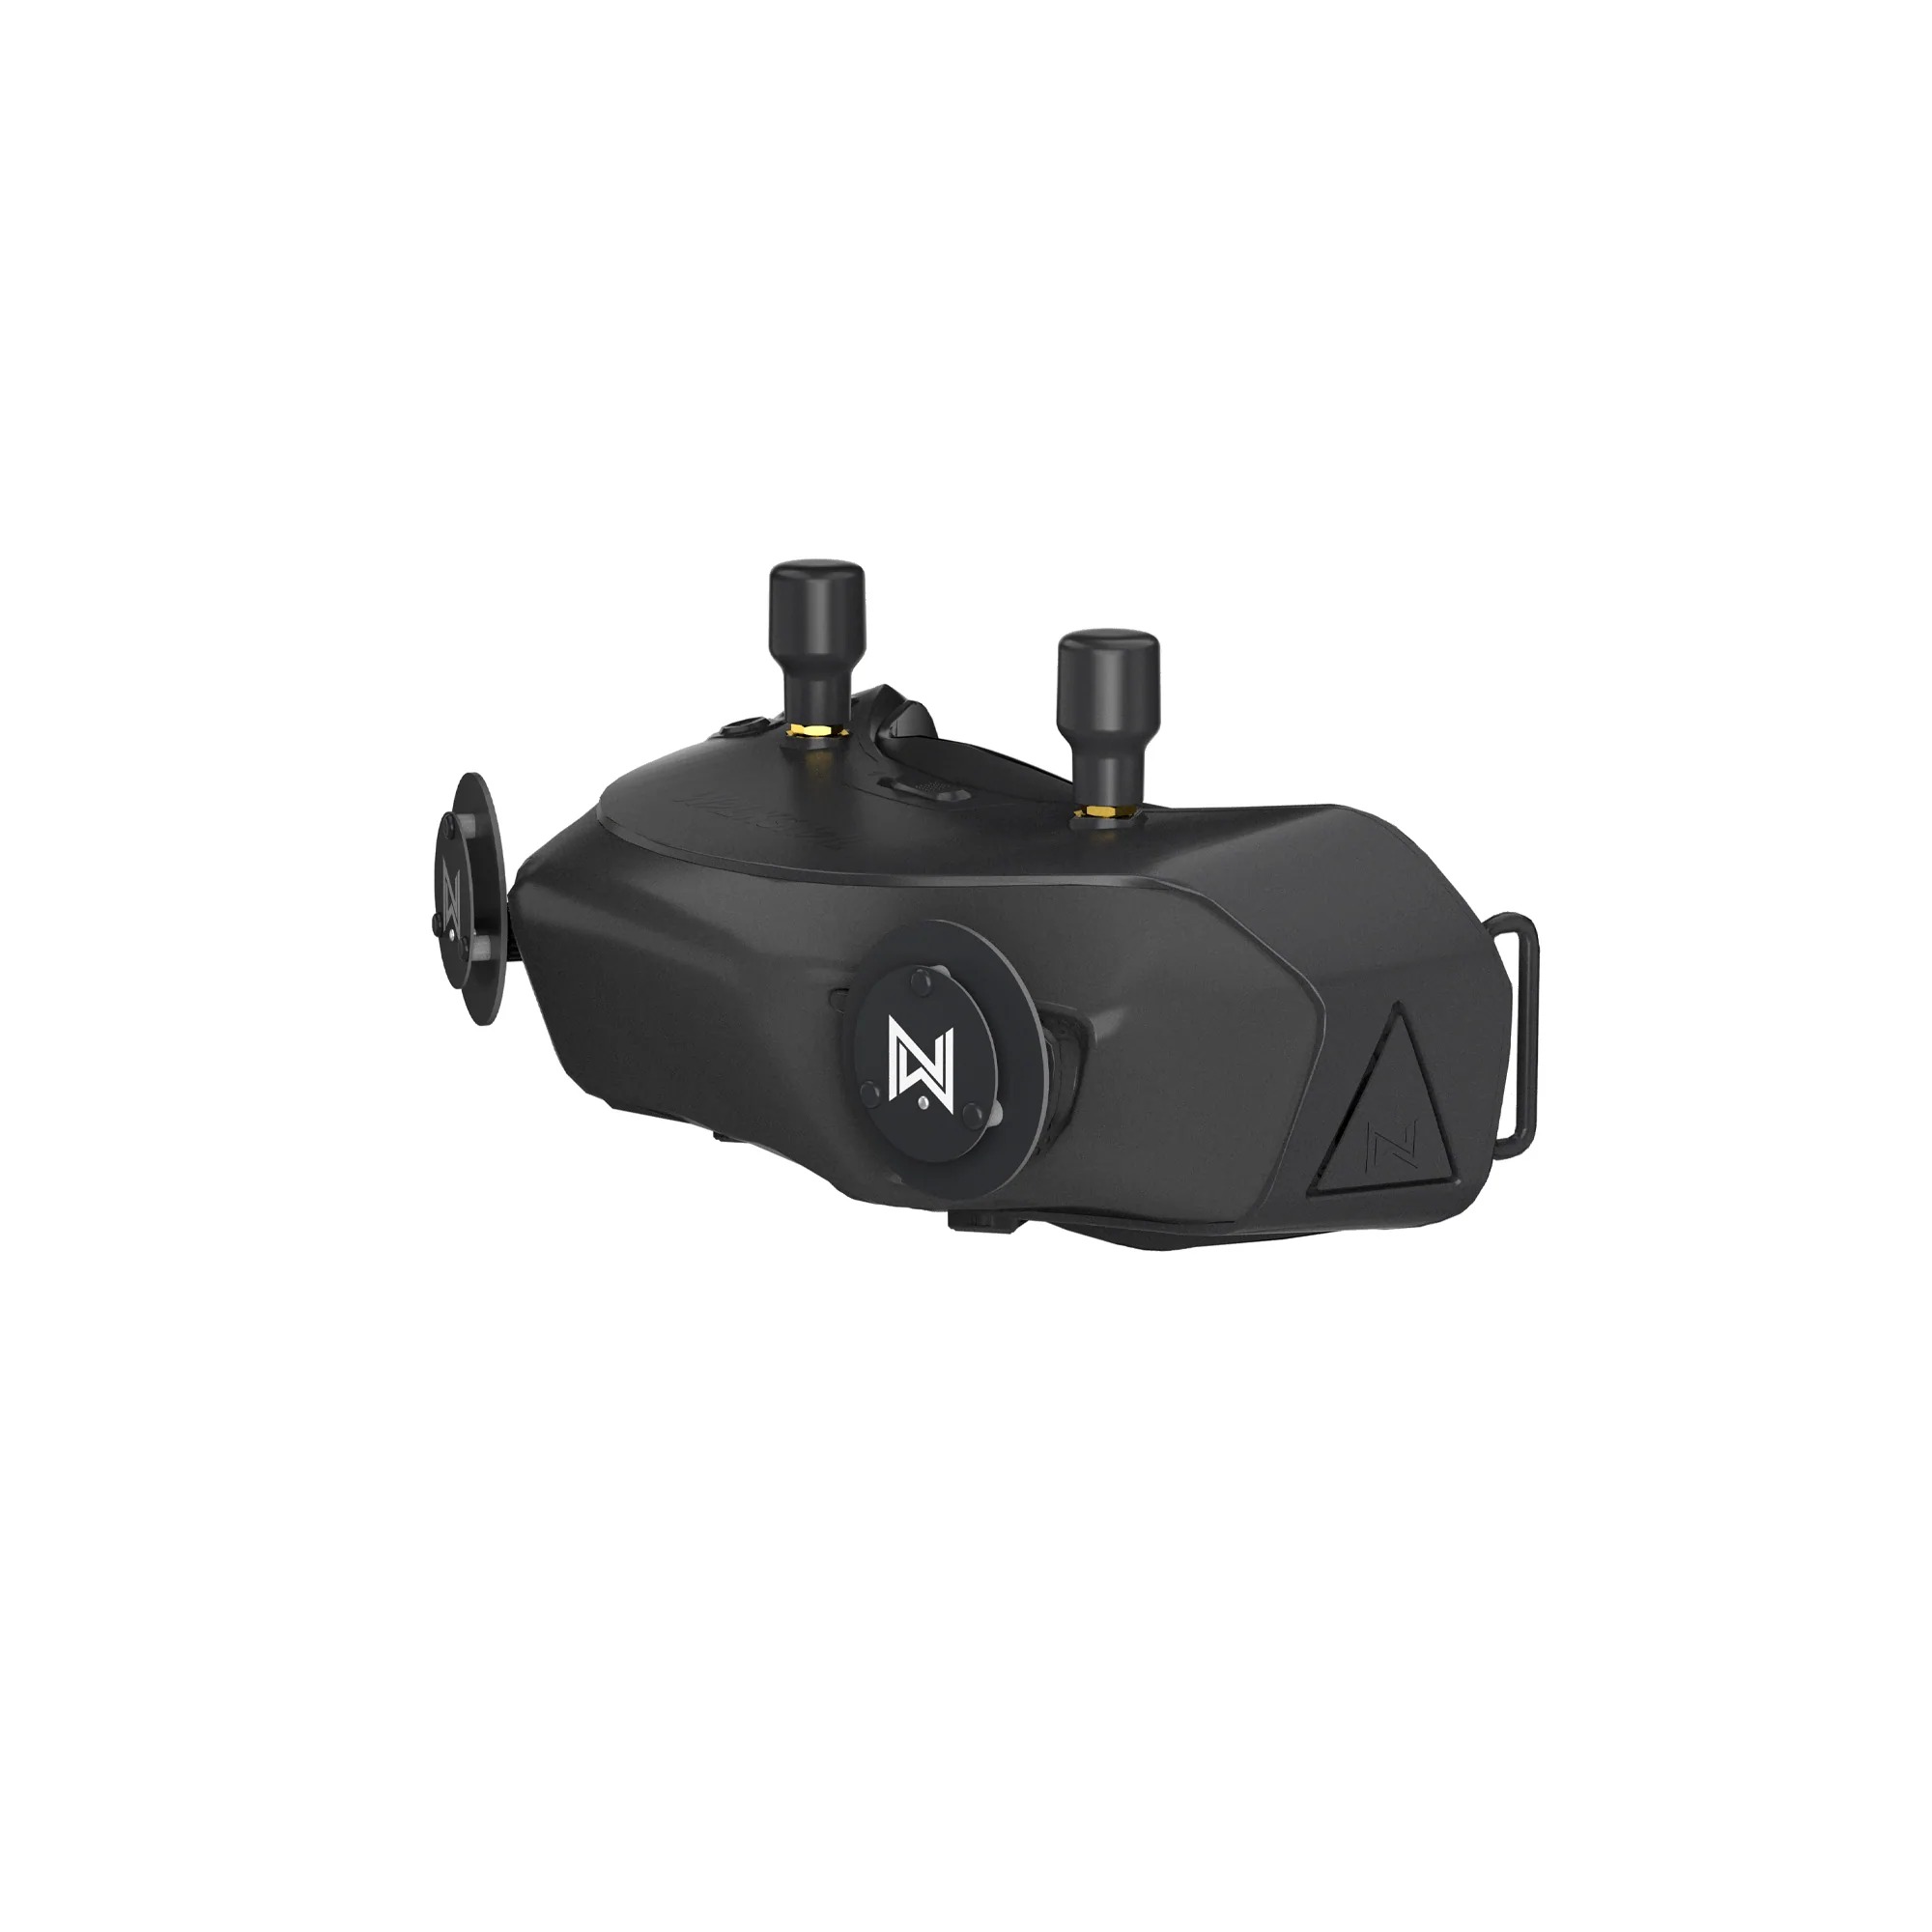 Isometric view of the Walksnail Avatar HD goggle from caddx